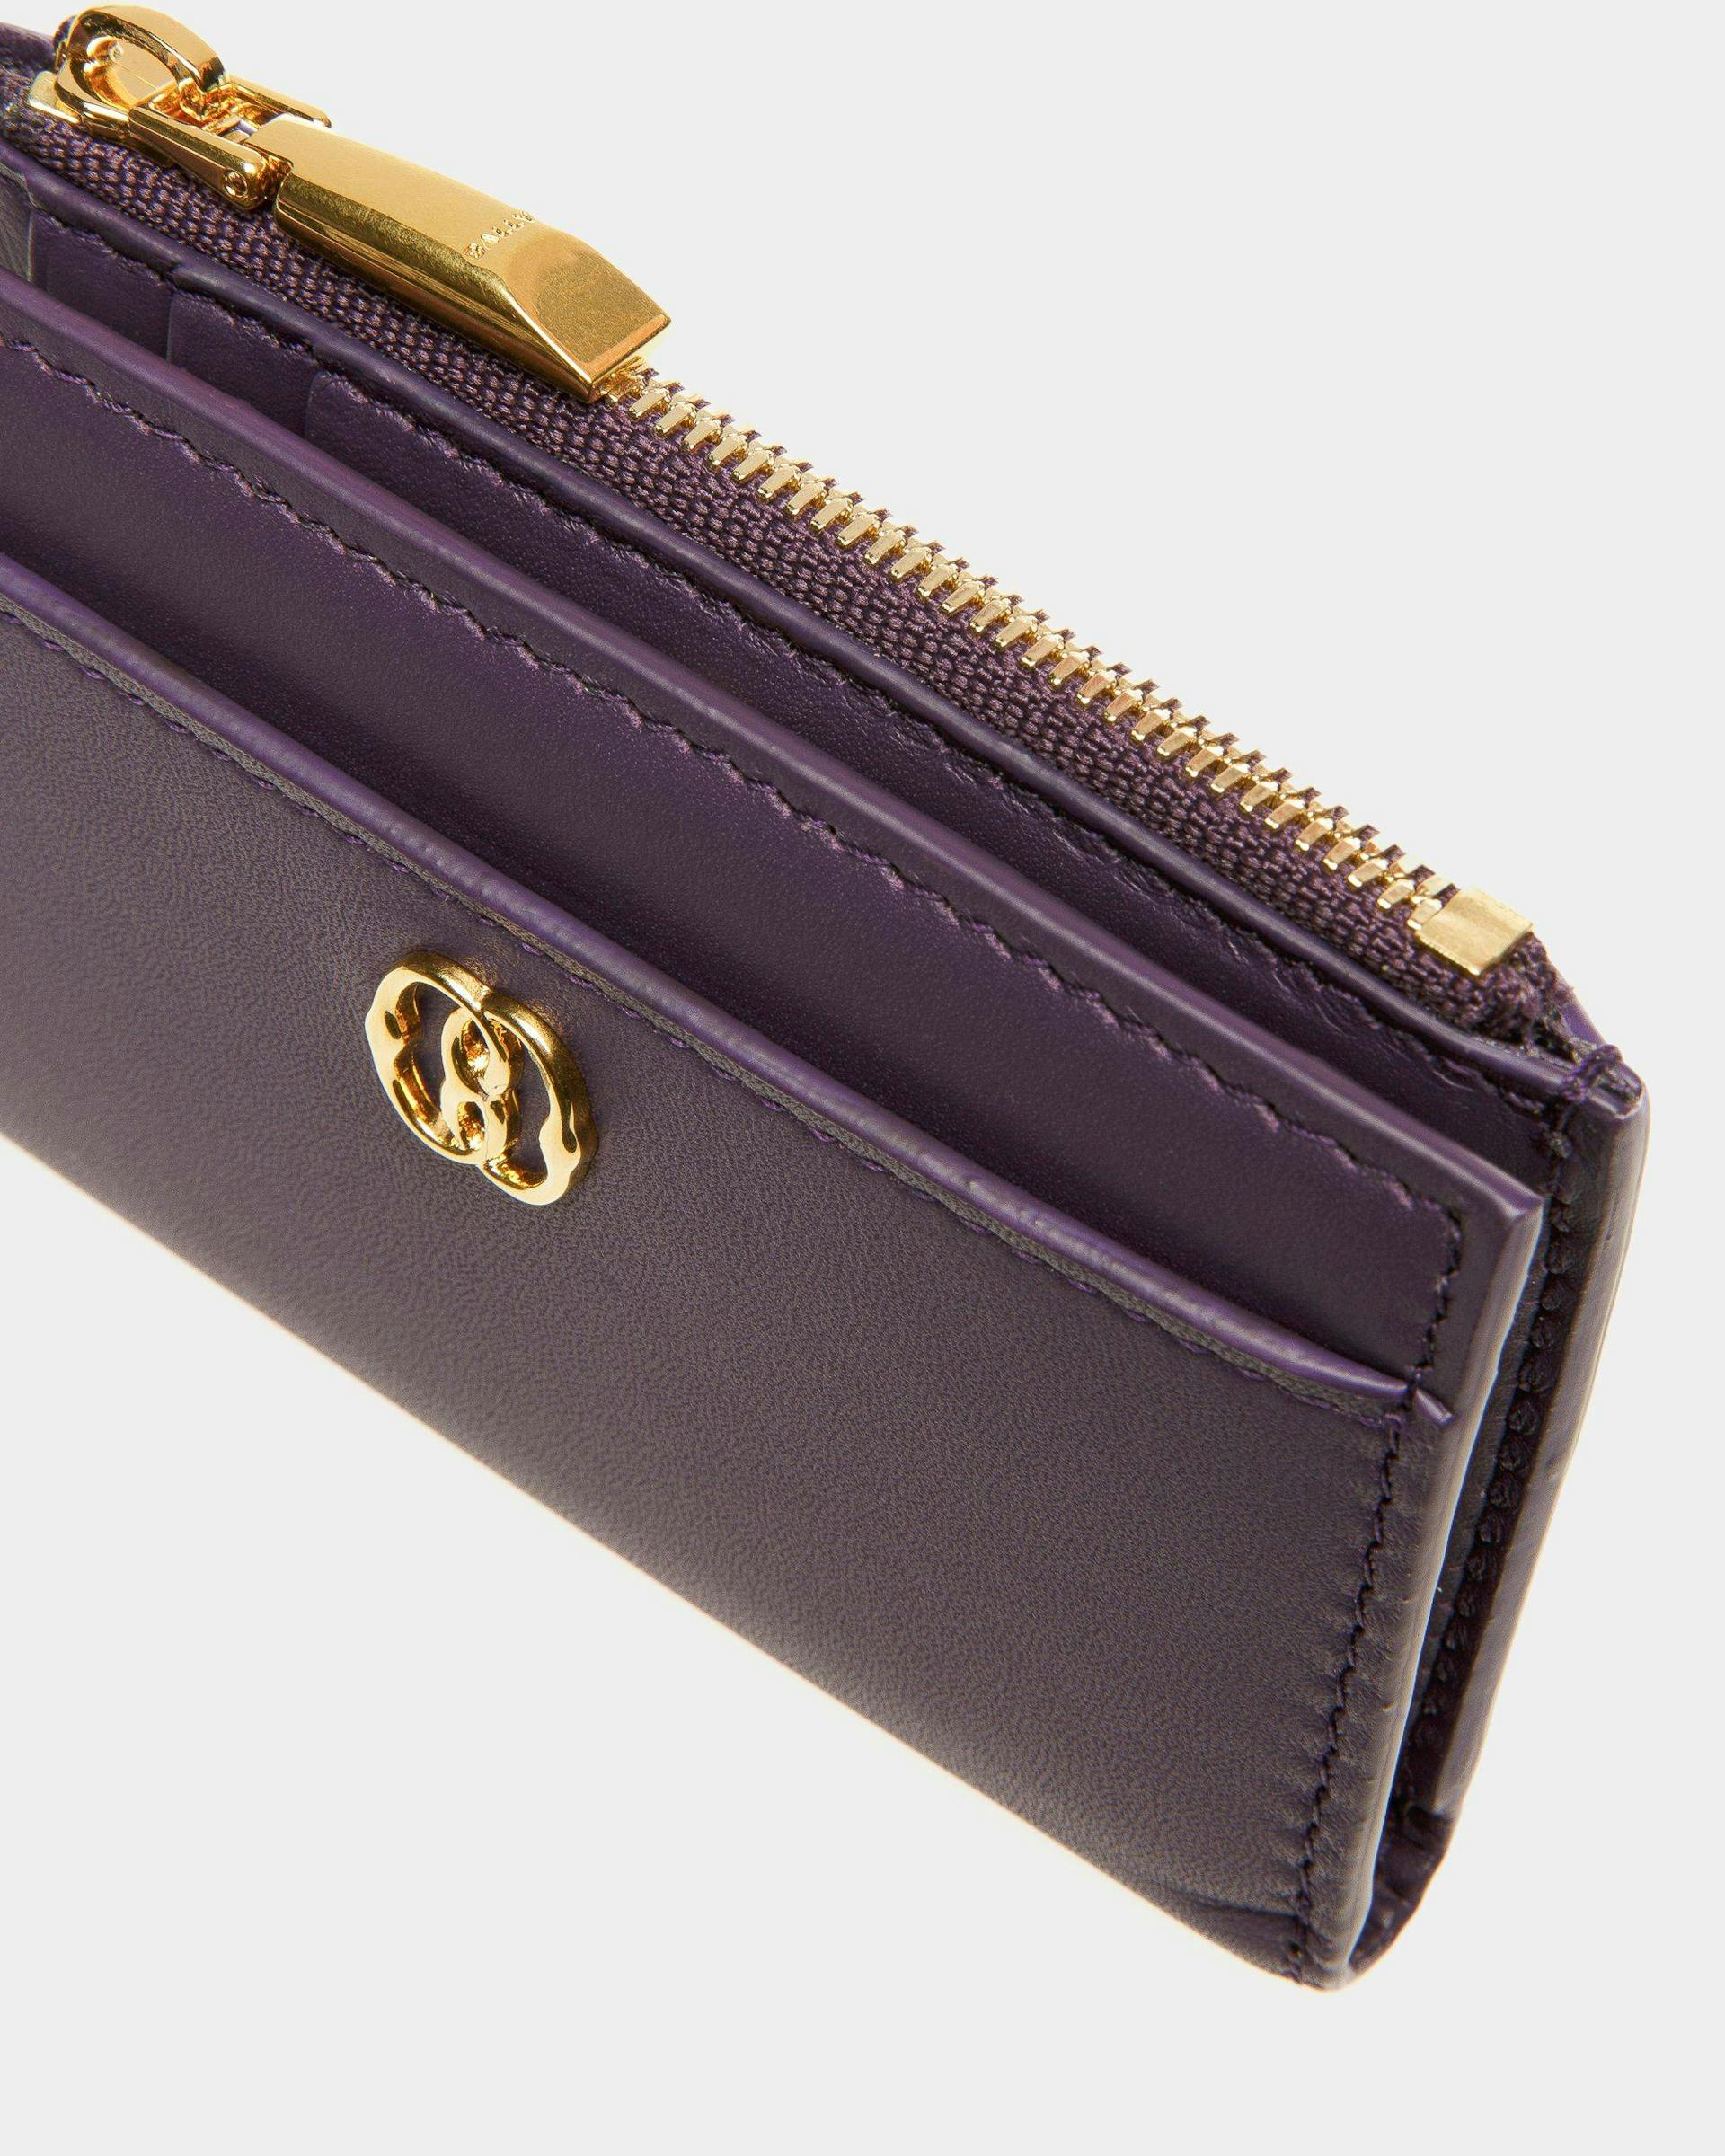 Emblem Wallet In Orchid Leather - Women's - Bally - 04